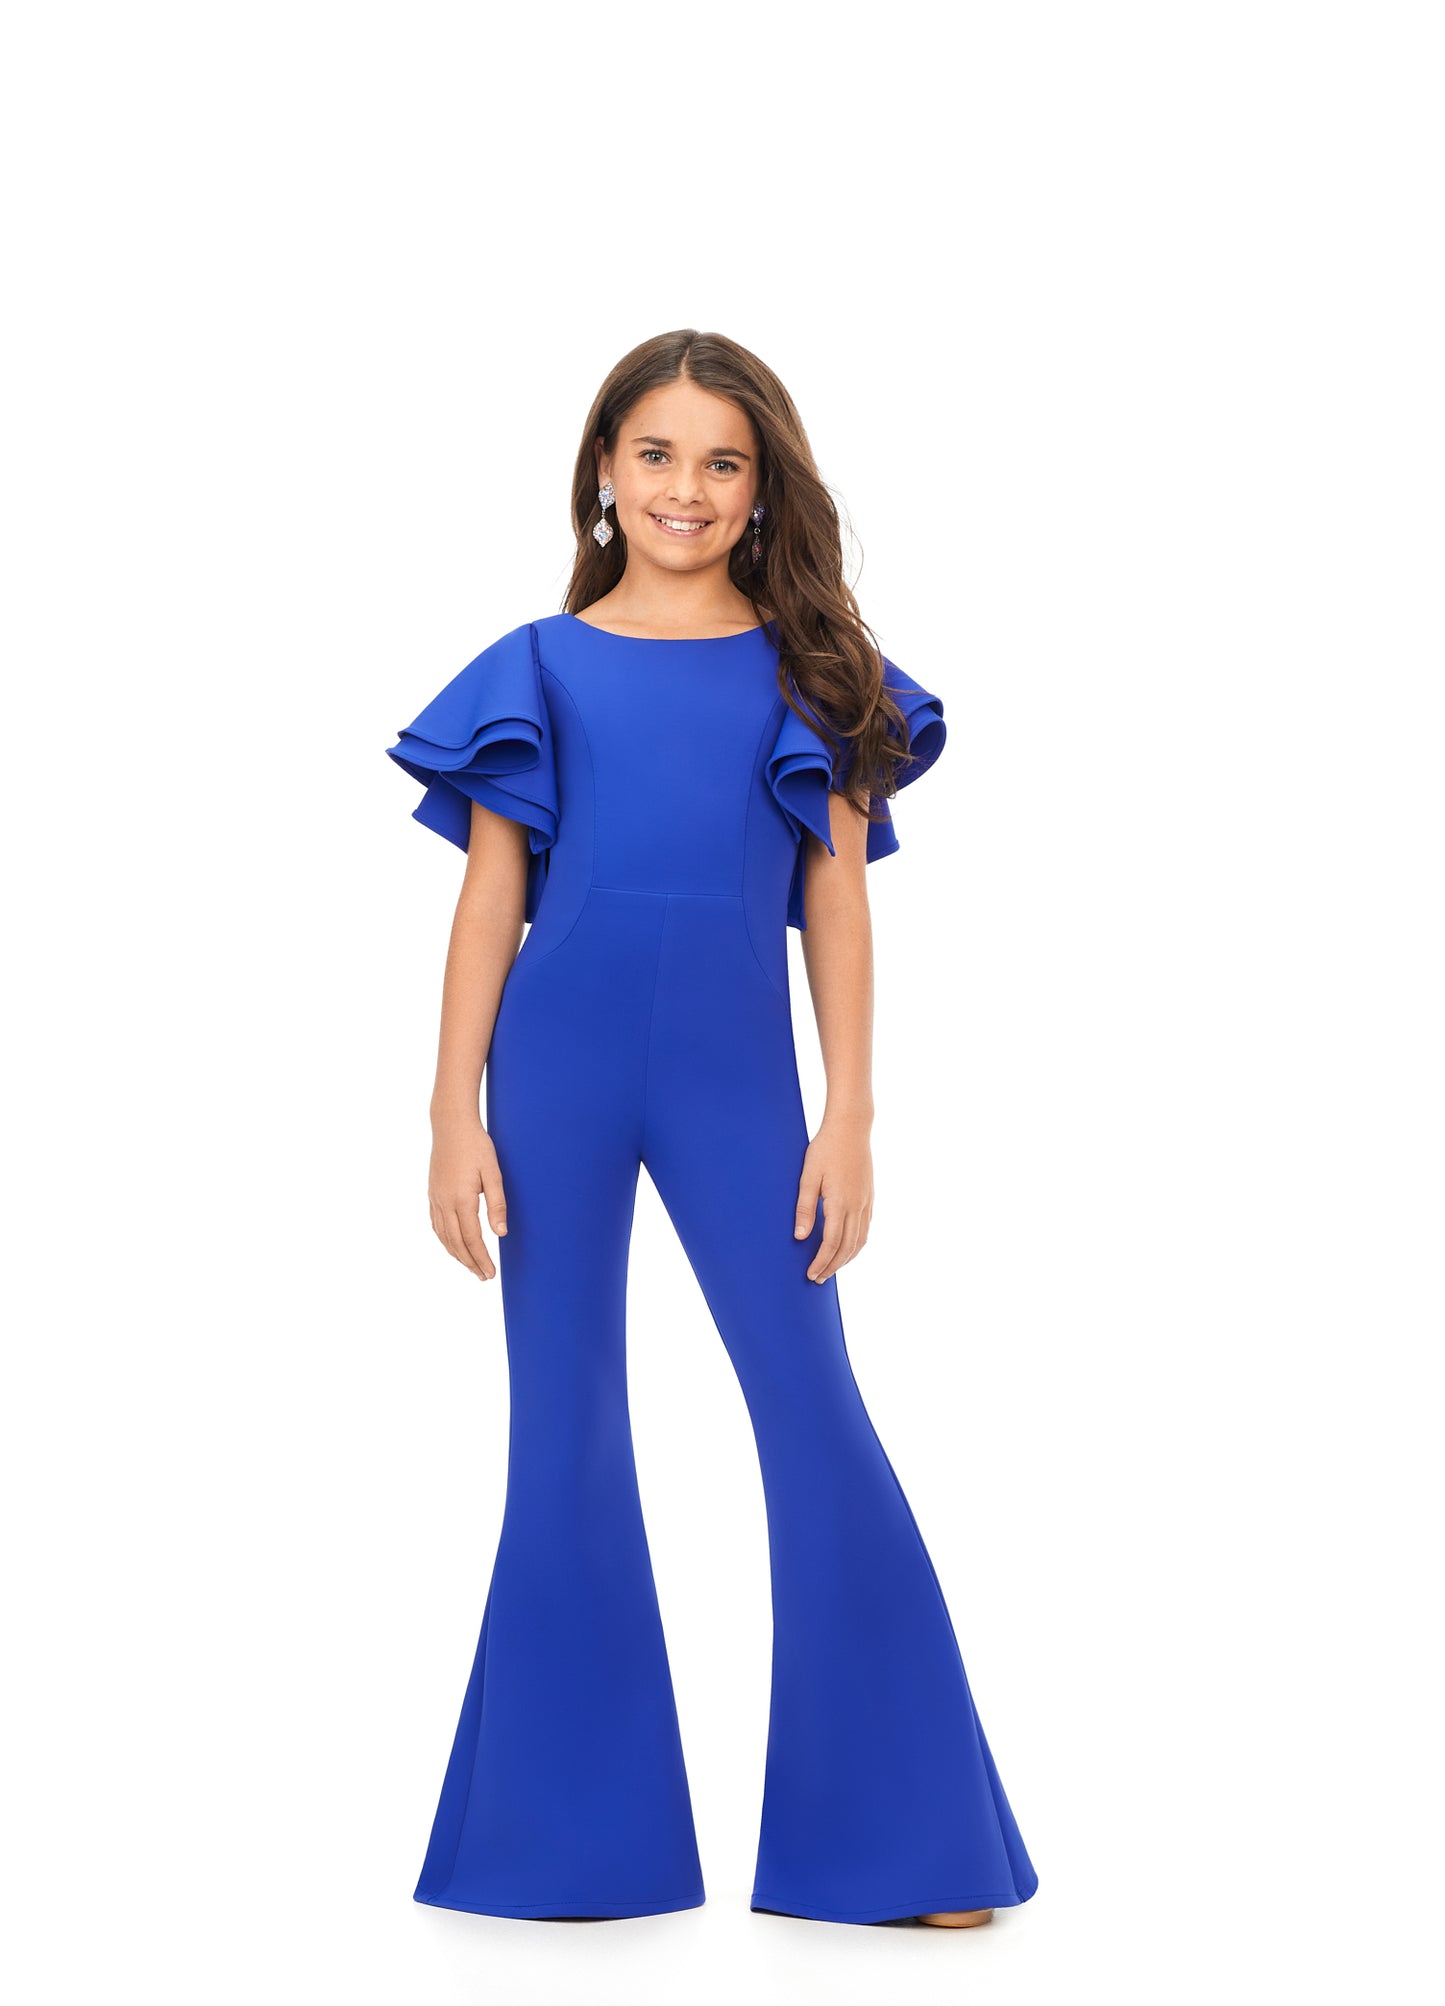 Ashley Lauren Kids 8156 Girls Crew neck jumpsuit with ruffle sleeves  The perfect jumpsuit for any occasion. This jumpsuit features a crew neckline, ruffle sleeves and flare bottom pants.